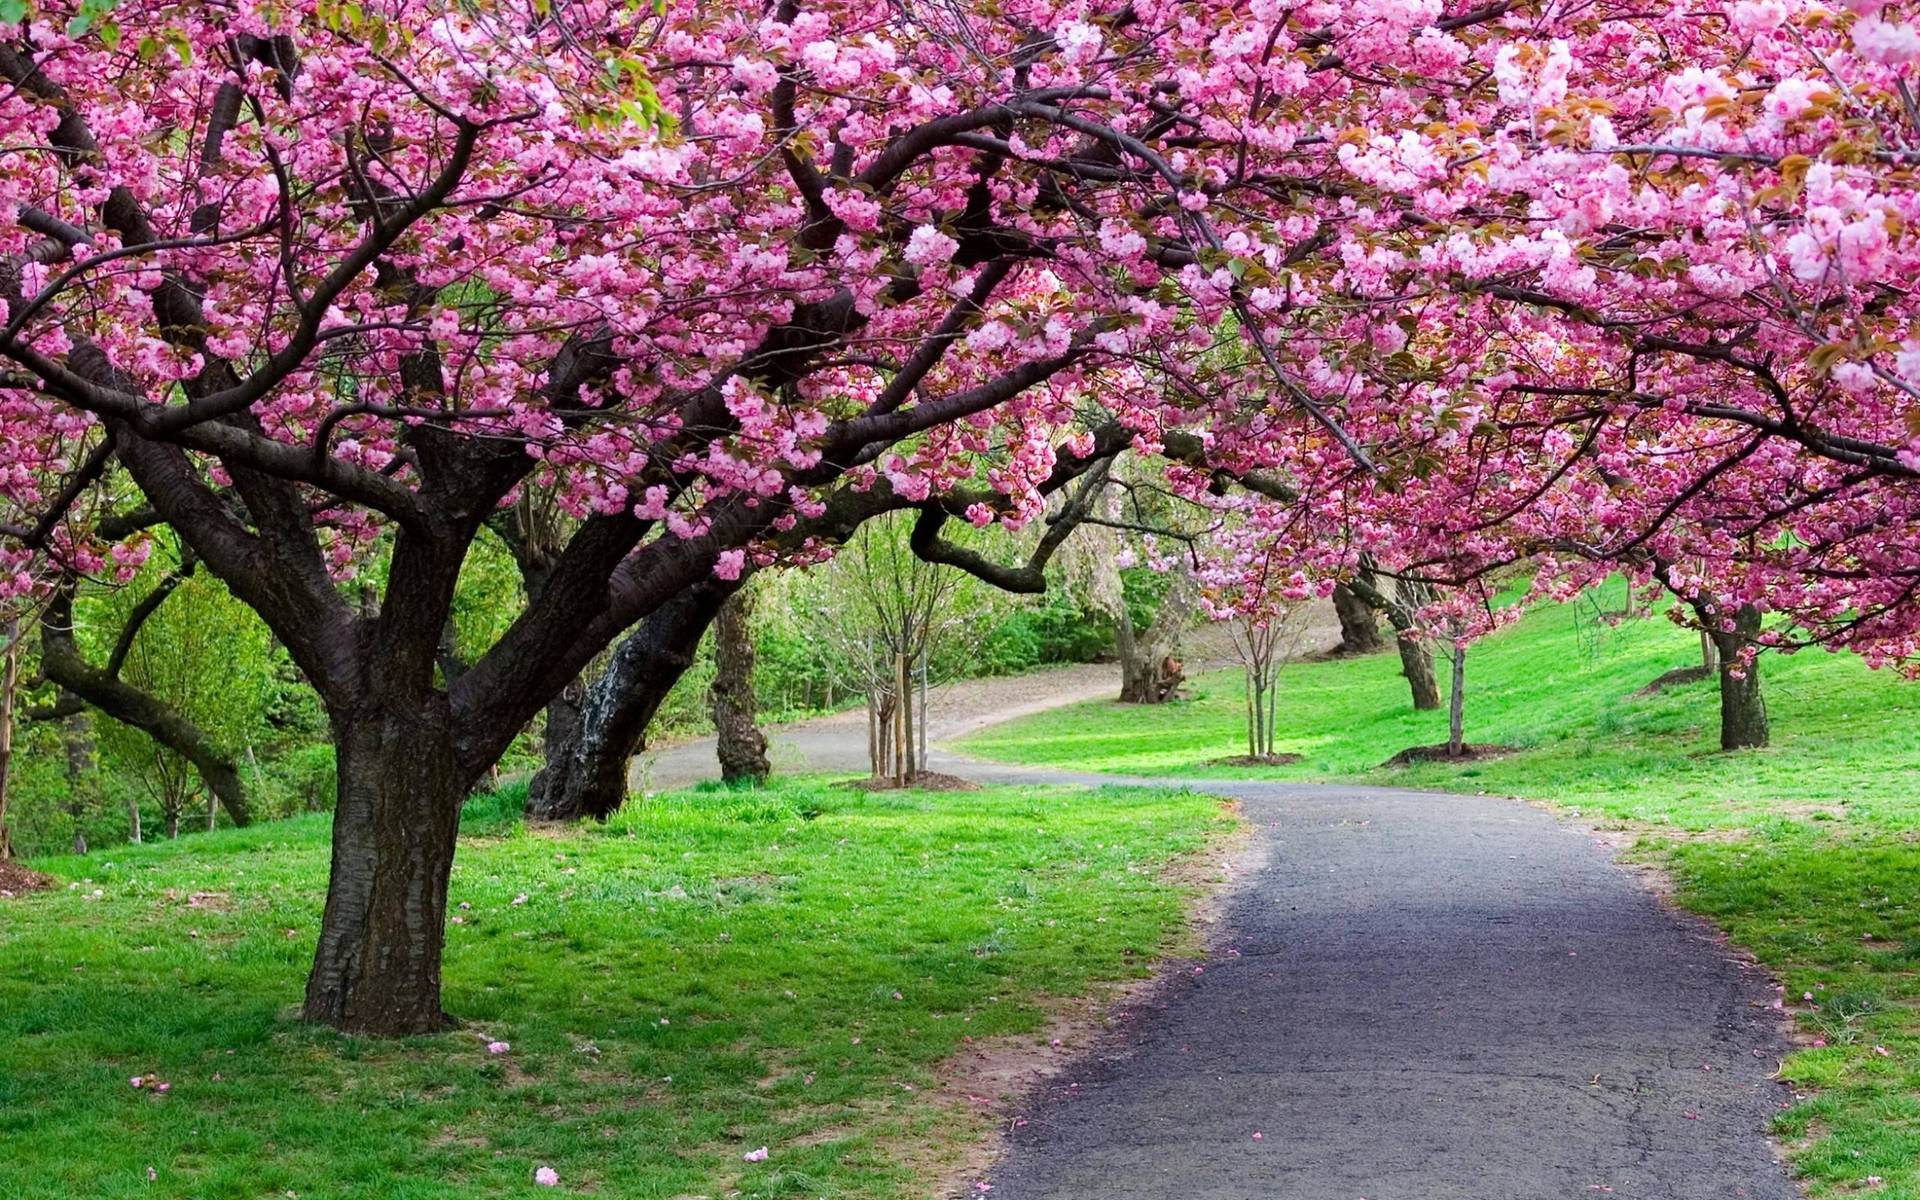 A stroll down the path of sakura flower-lined trees. Wallpaper